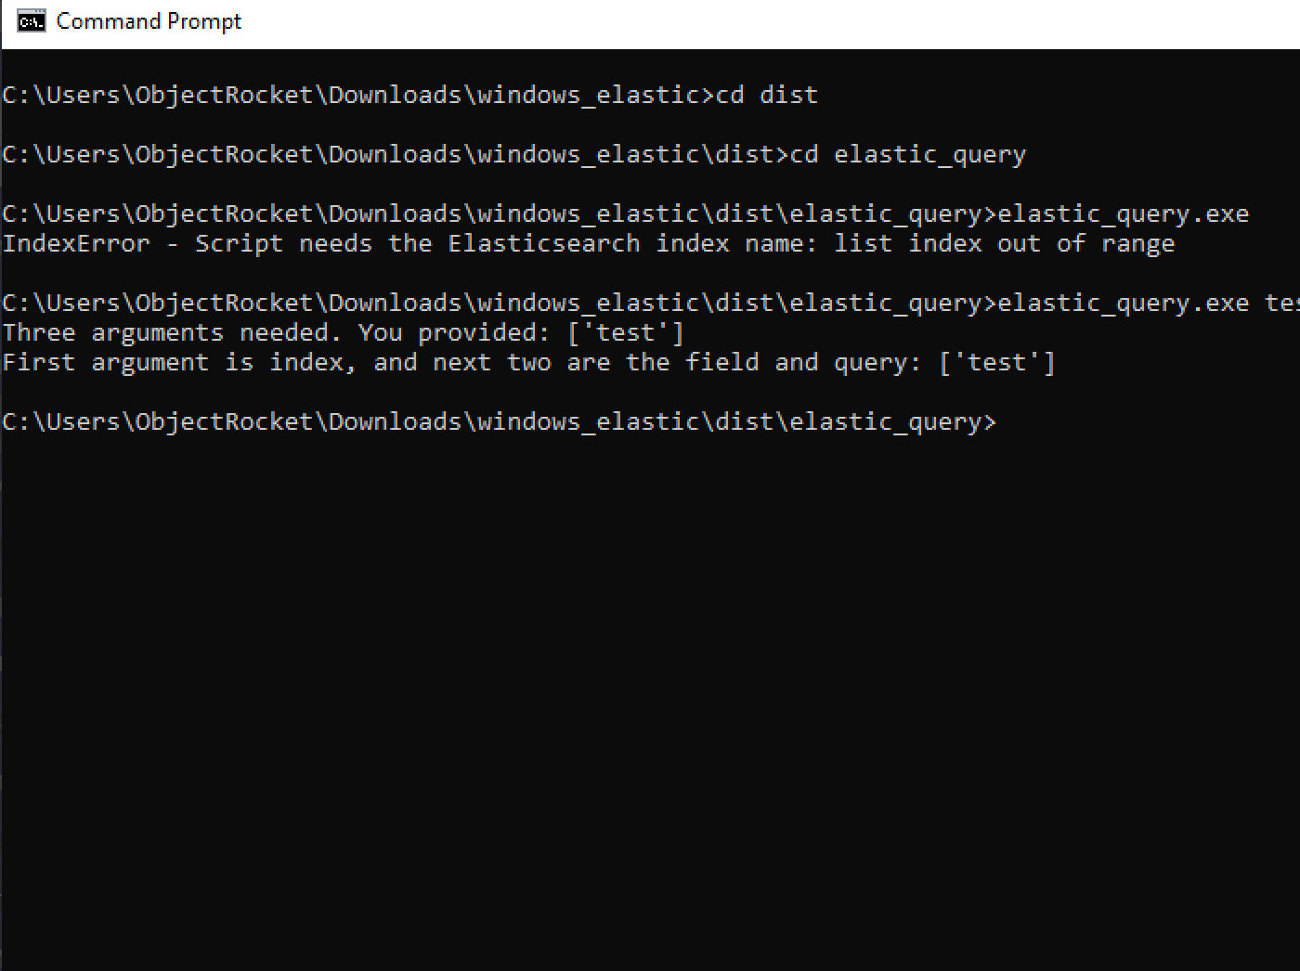 Screenshot of a Windows Command Prompt application created using PyInstaller for Python